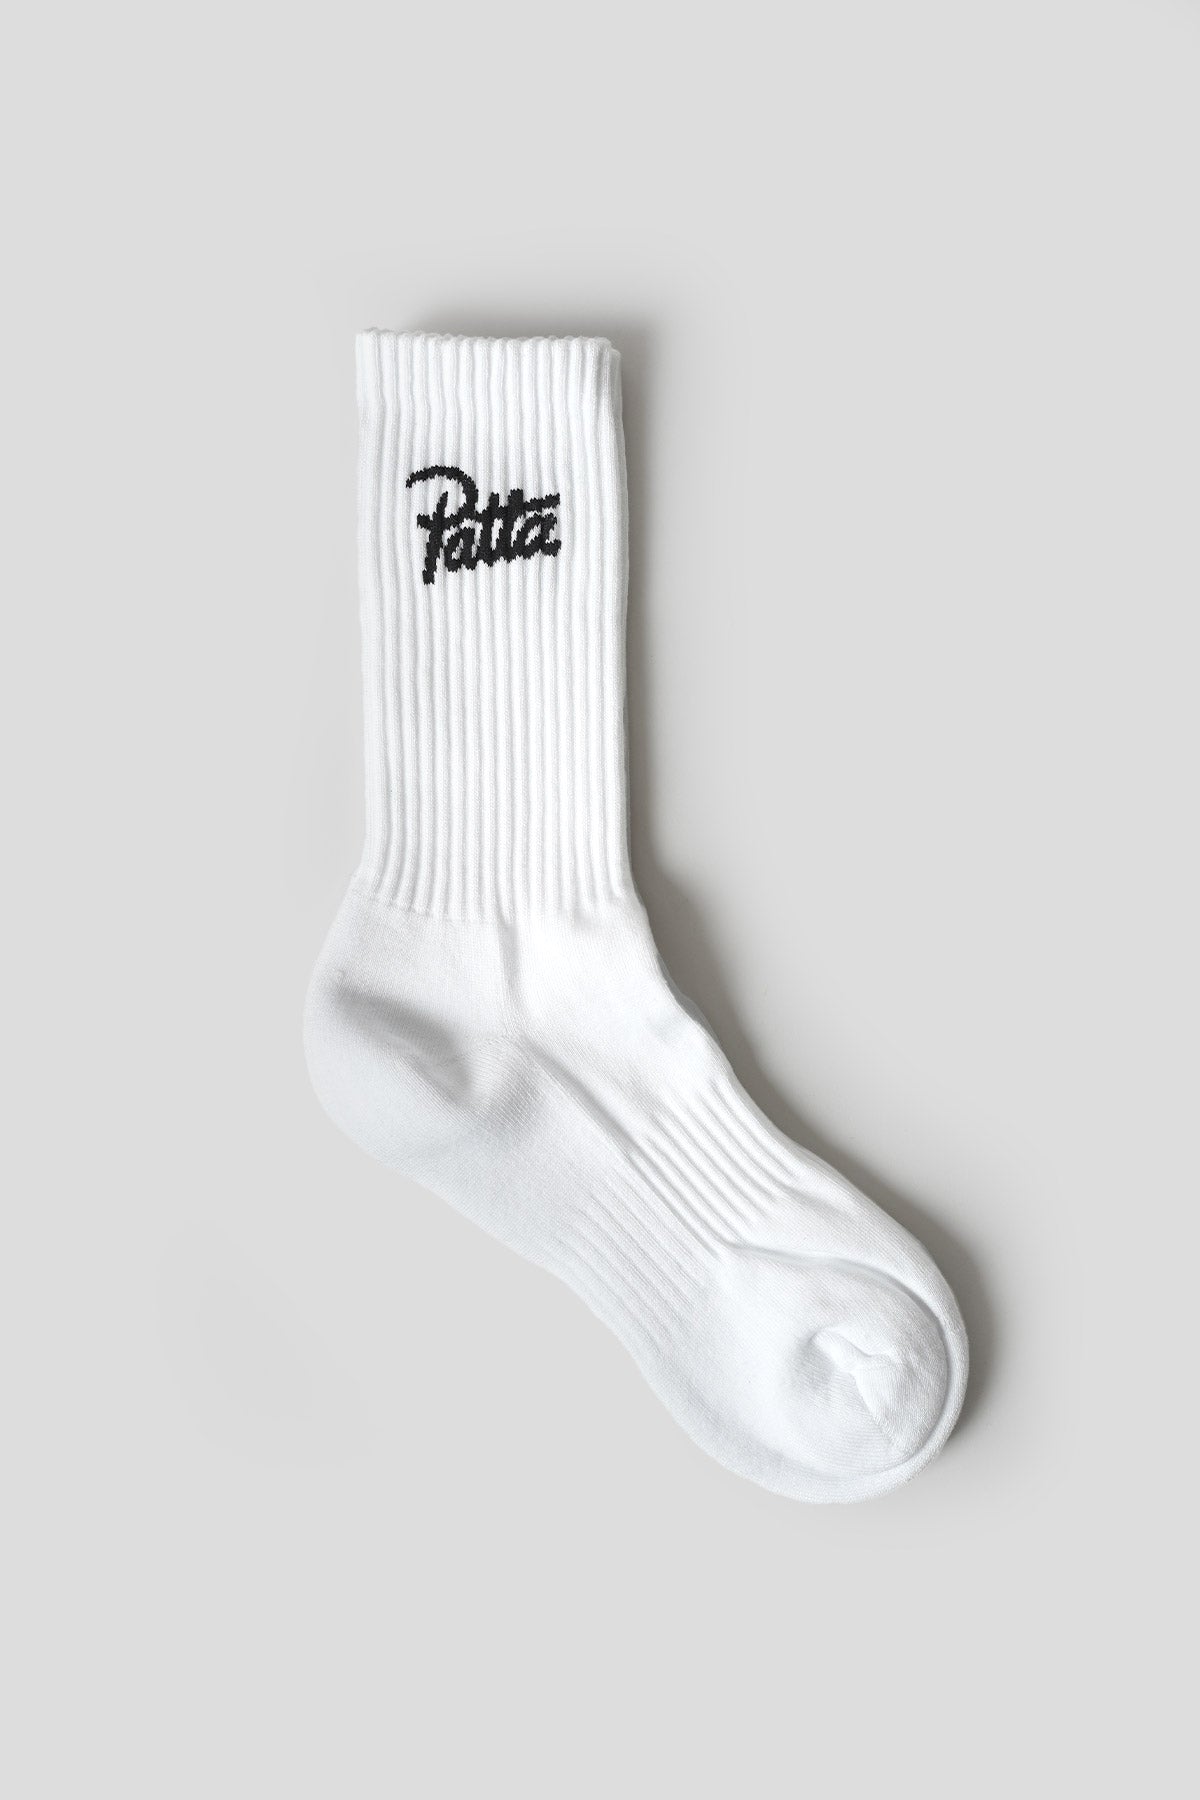 Patta - CHAUSSETTES BASIC SPORT BLANCHES - LE LABO STORE